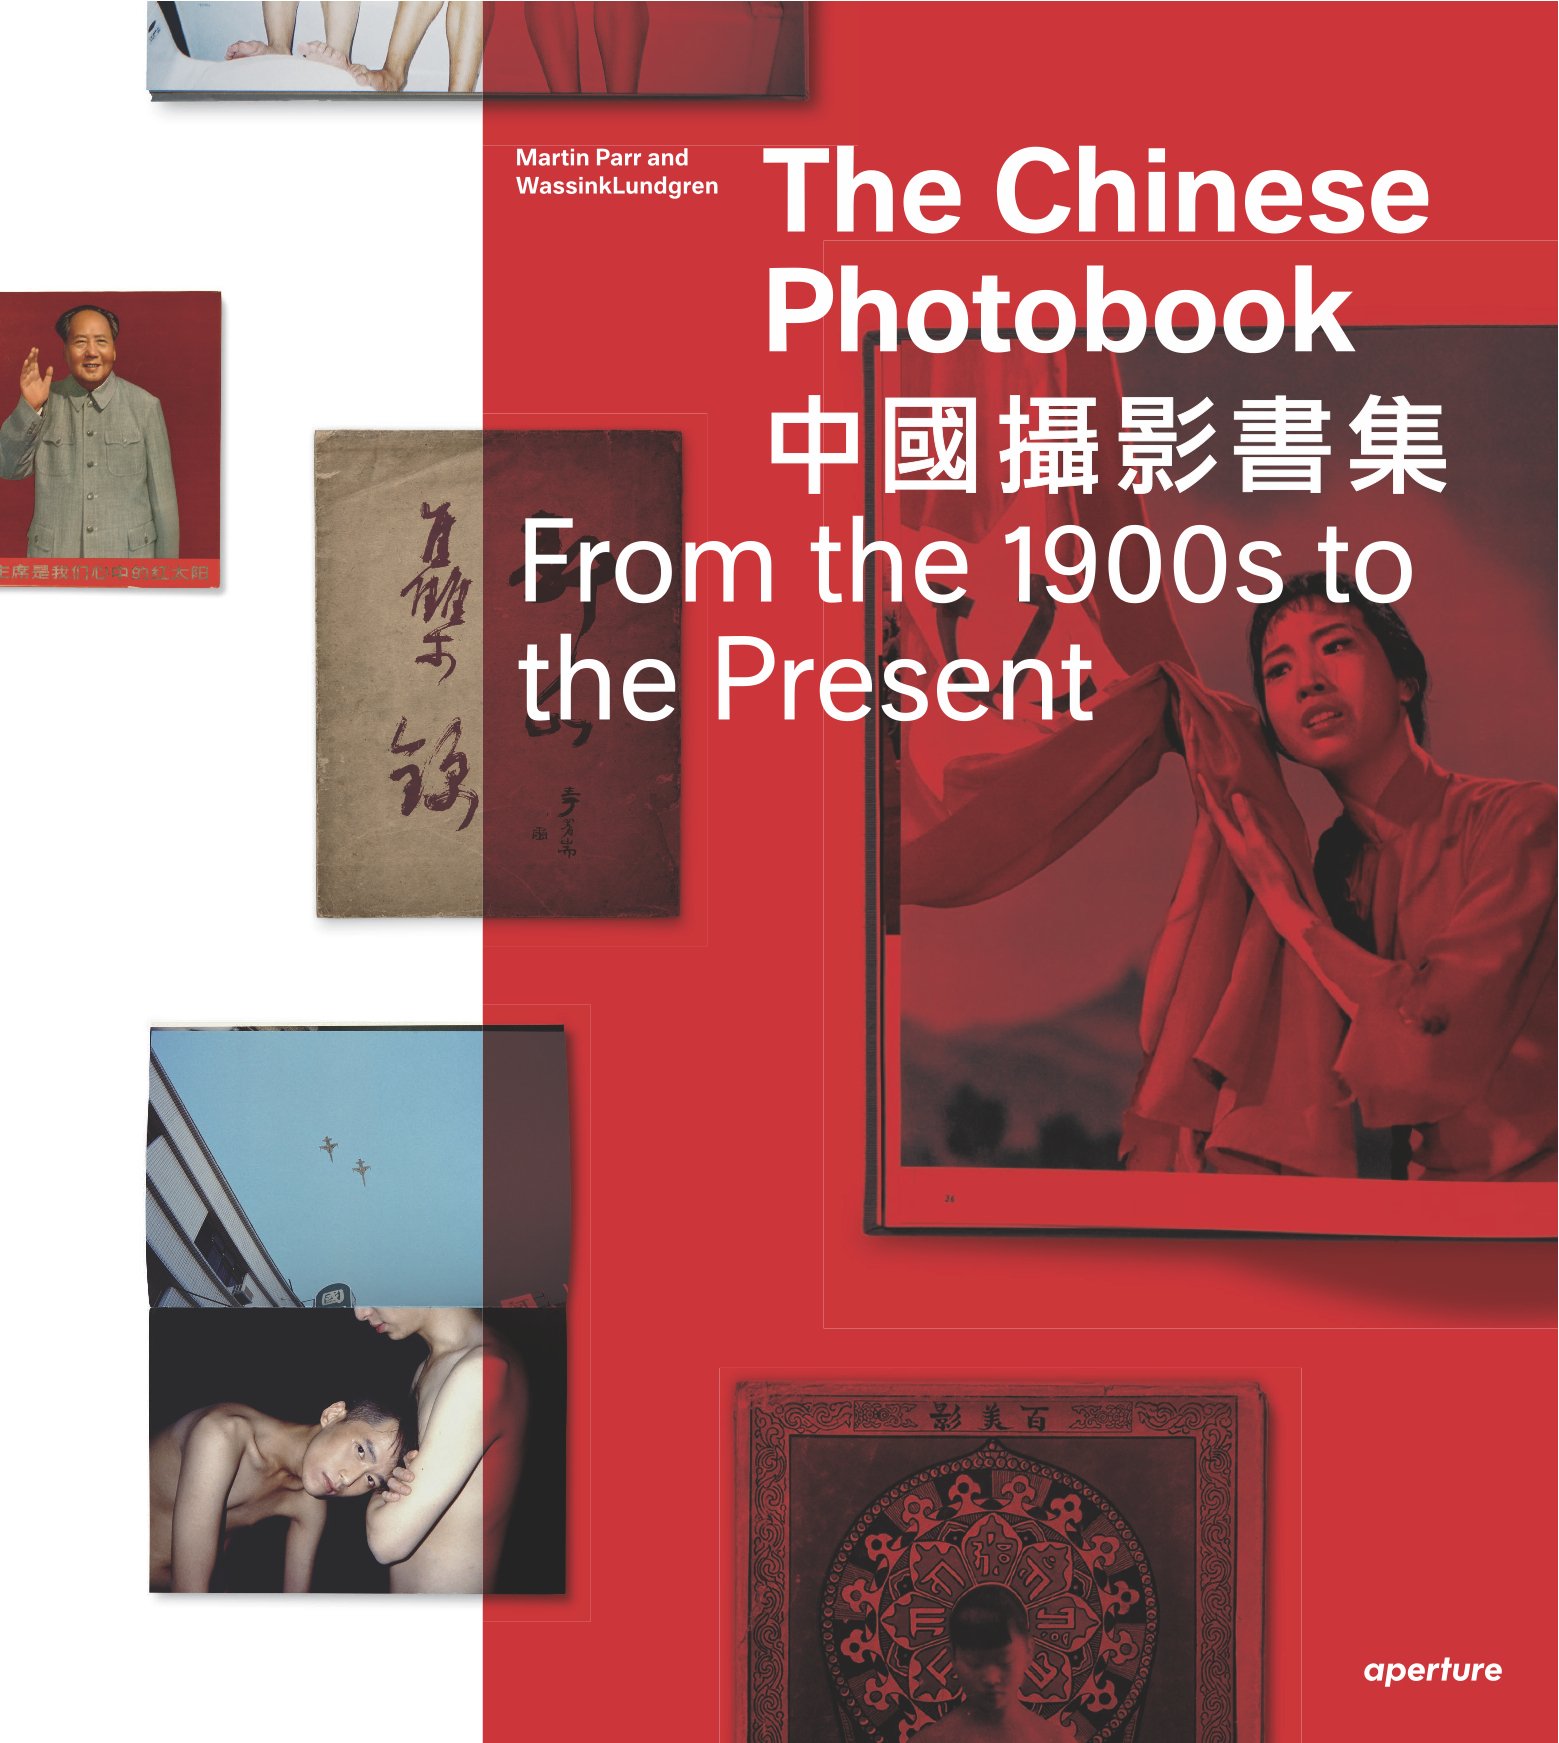 The Chinese Photobook - From the 1900s to the Present